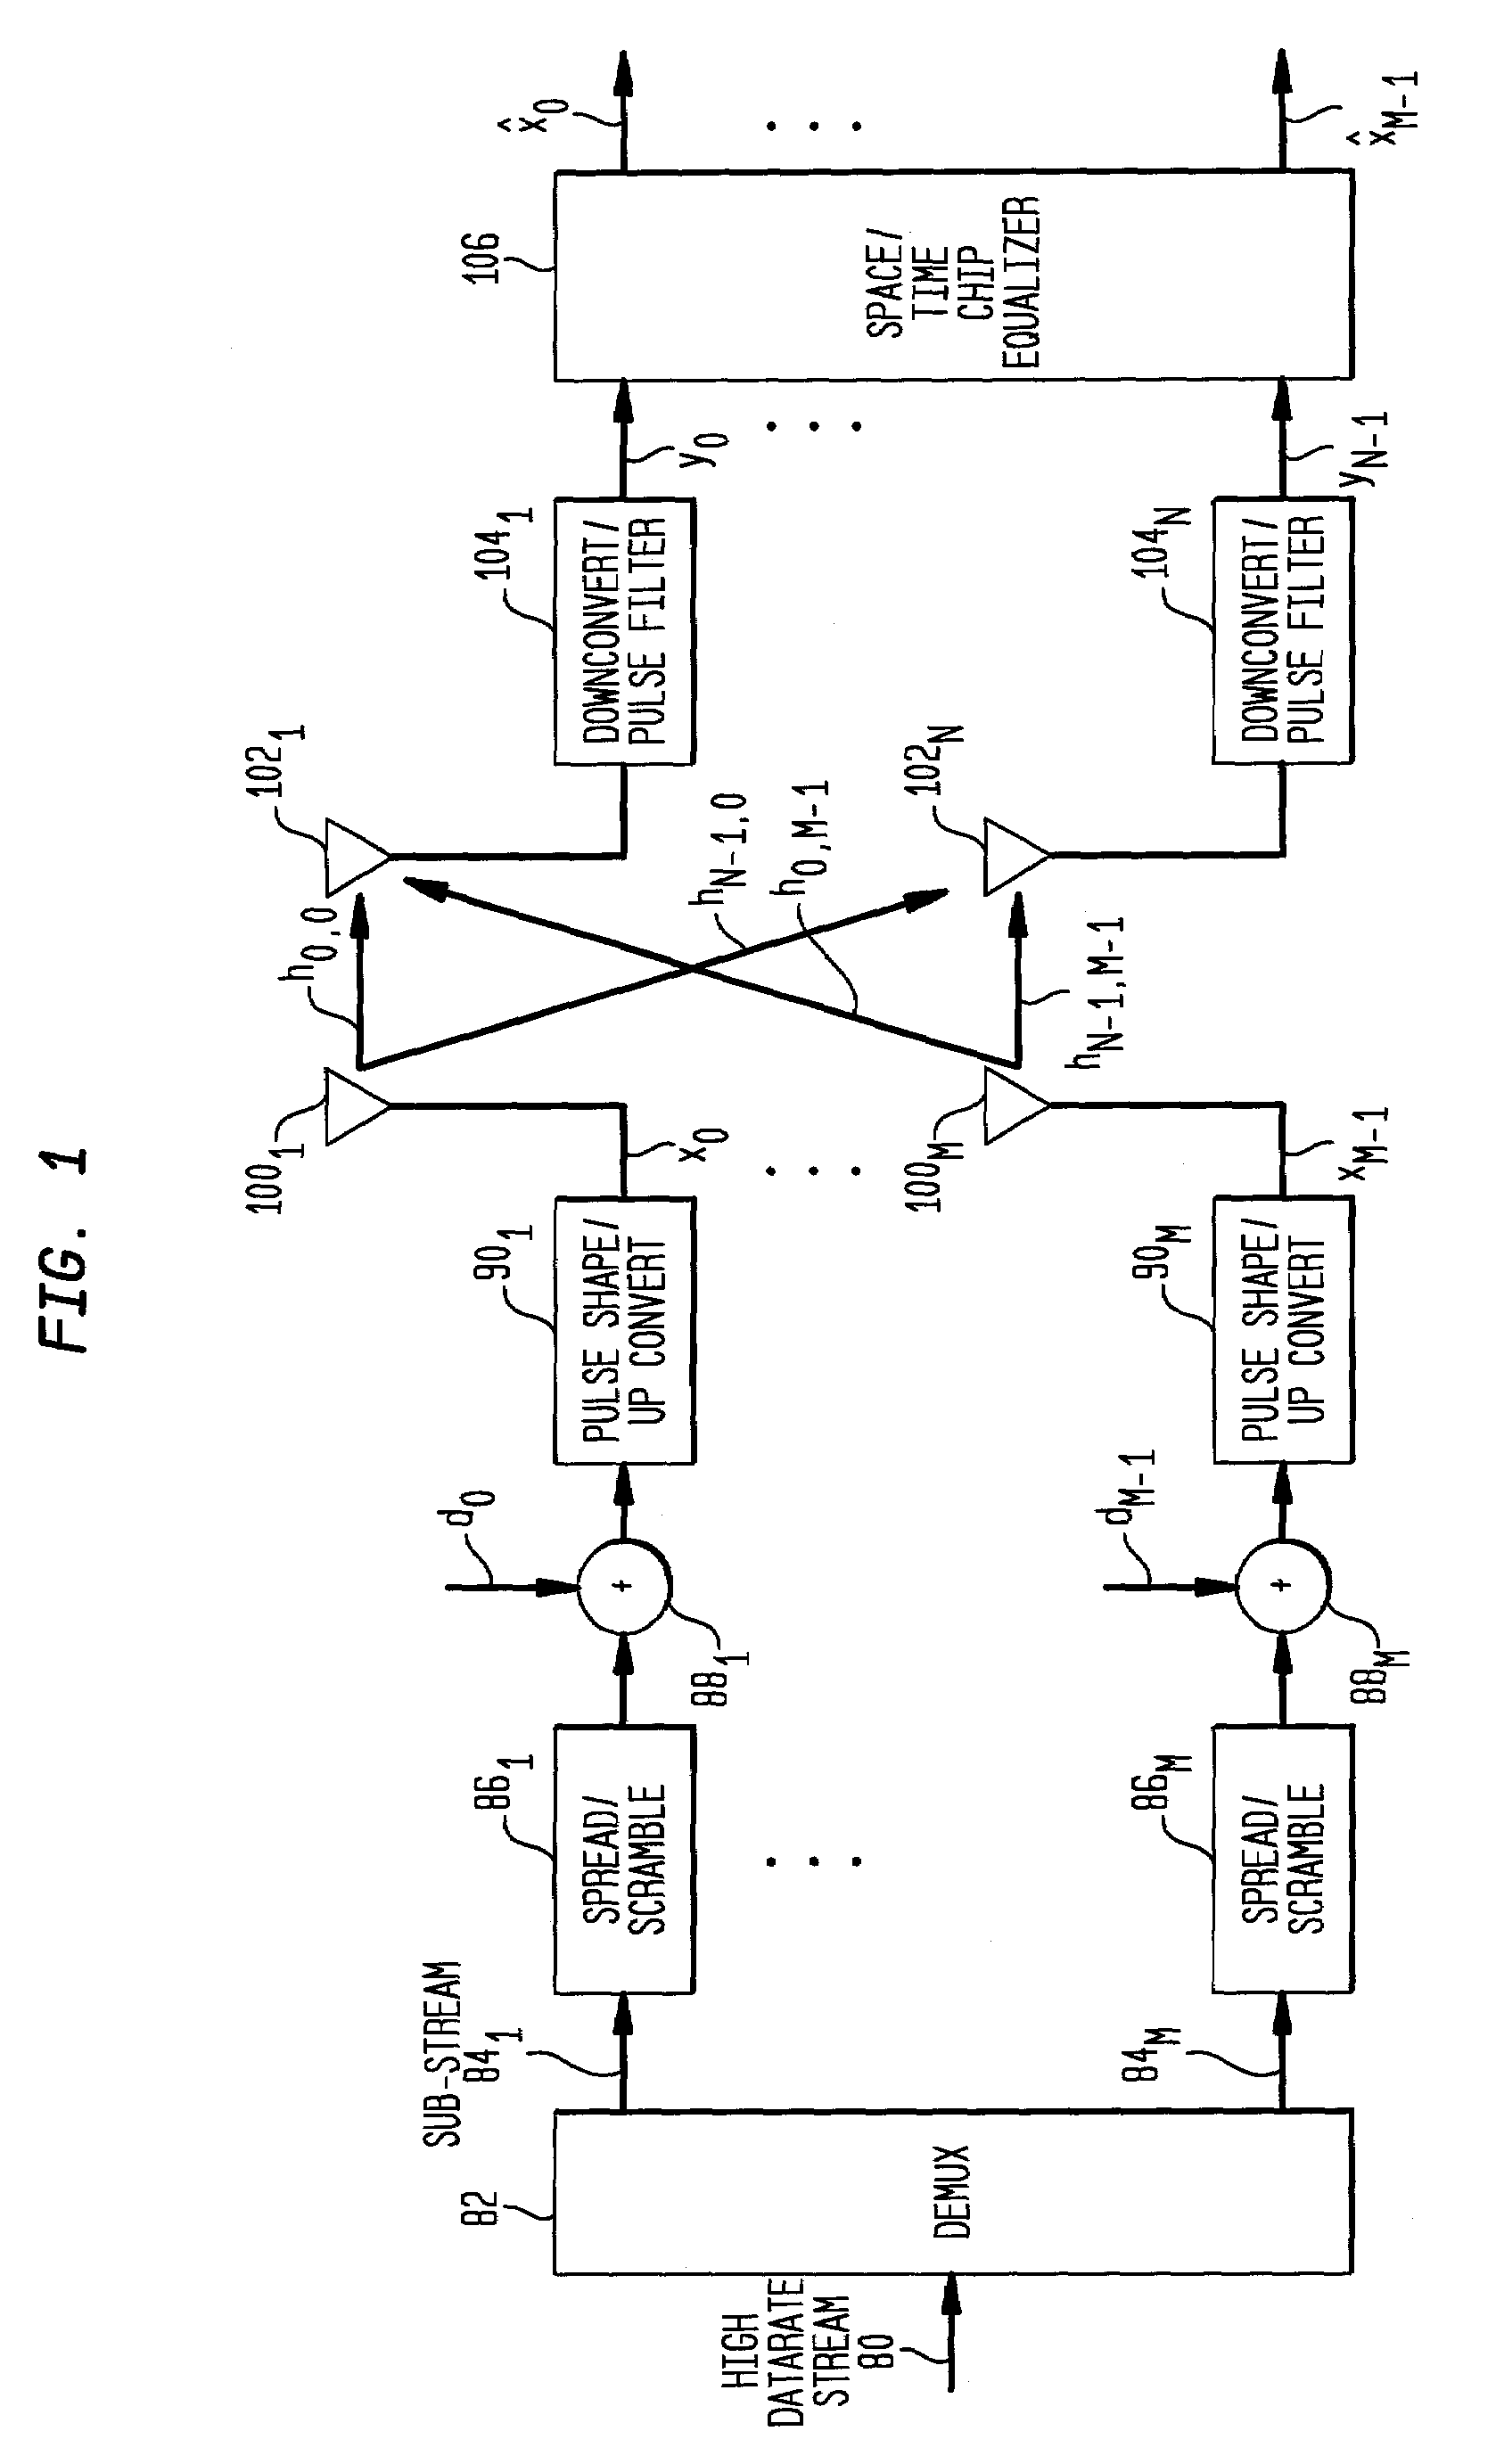 Equalizer and method for performing equalization in a wireless communications system